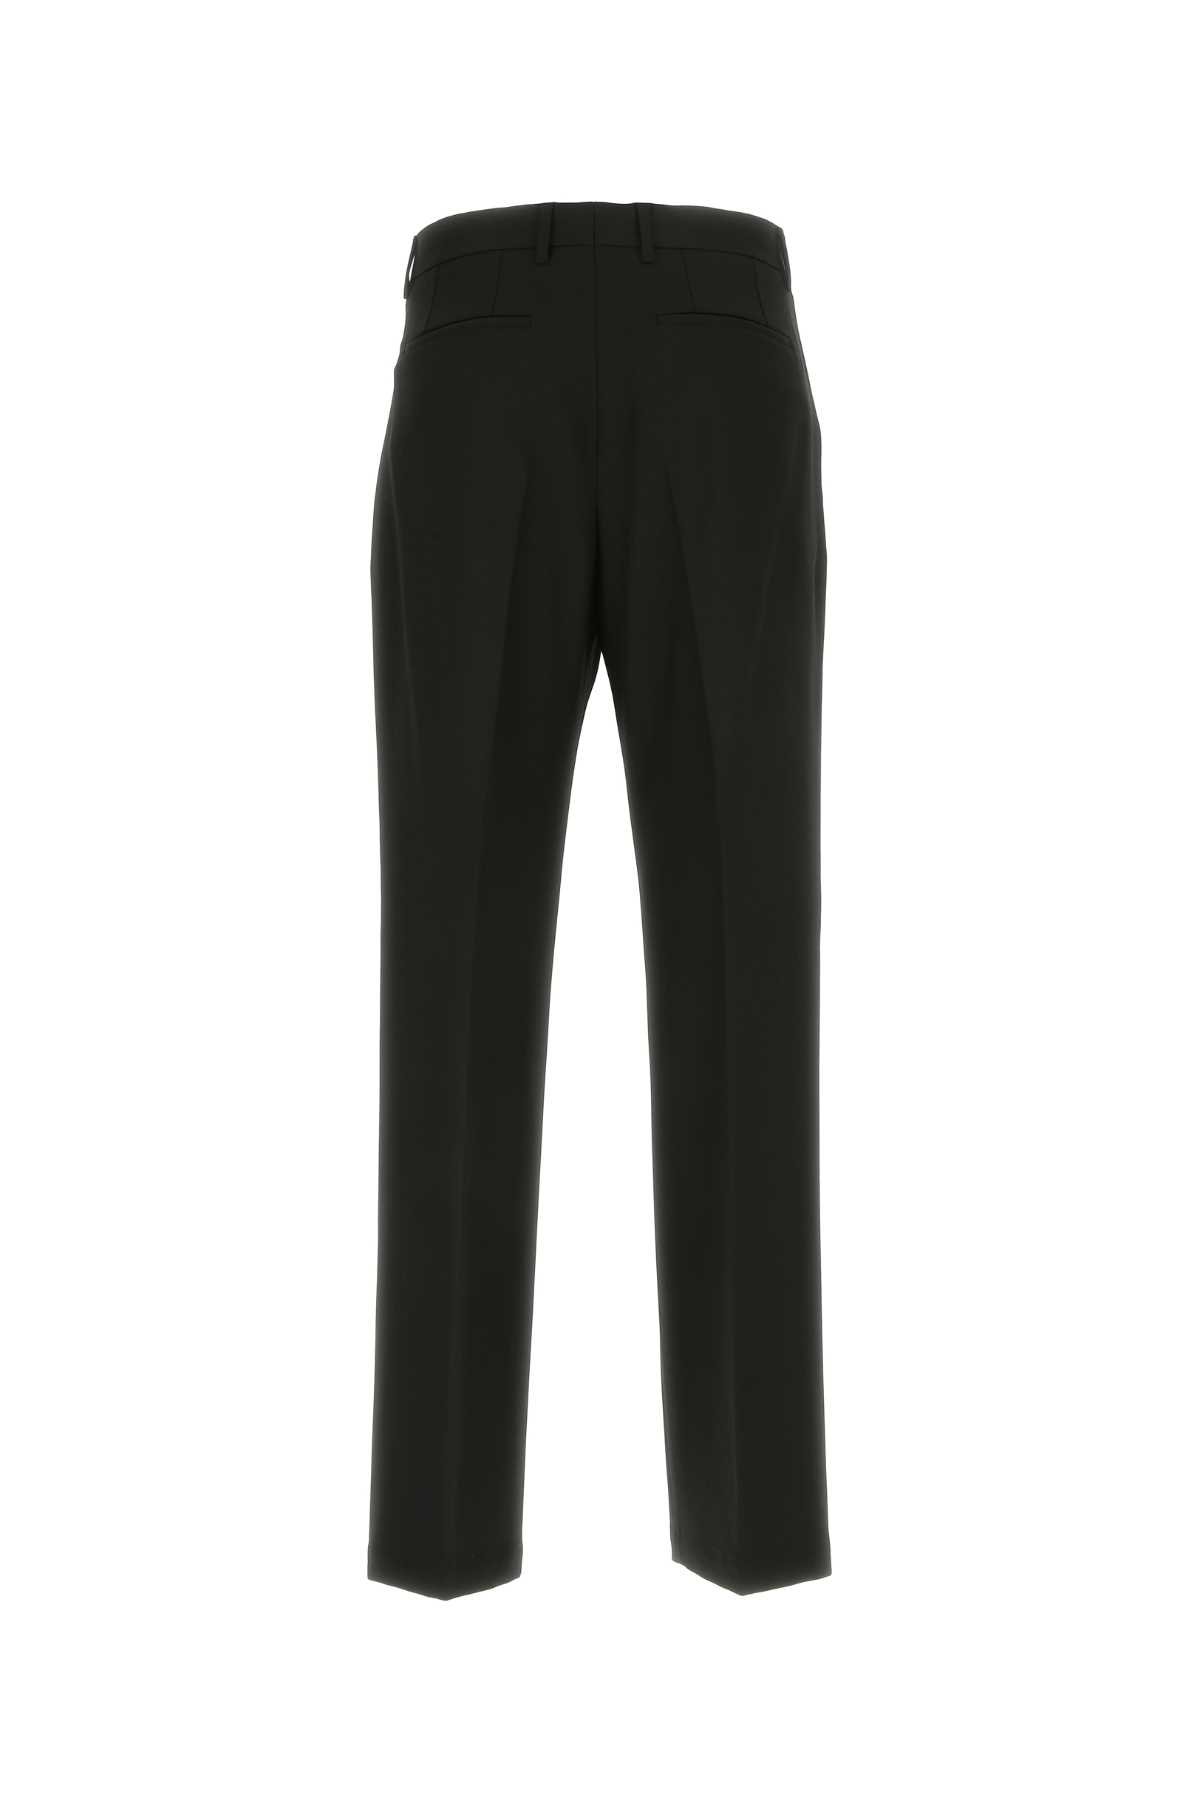 Burberry Black Wool Trouser In A1189